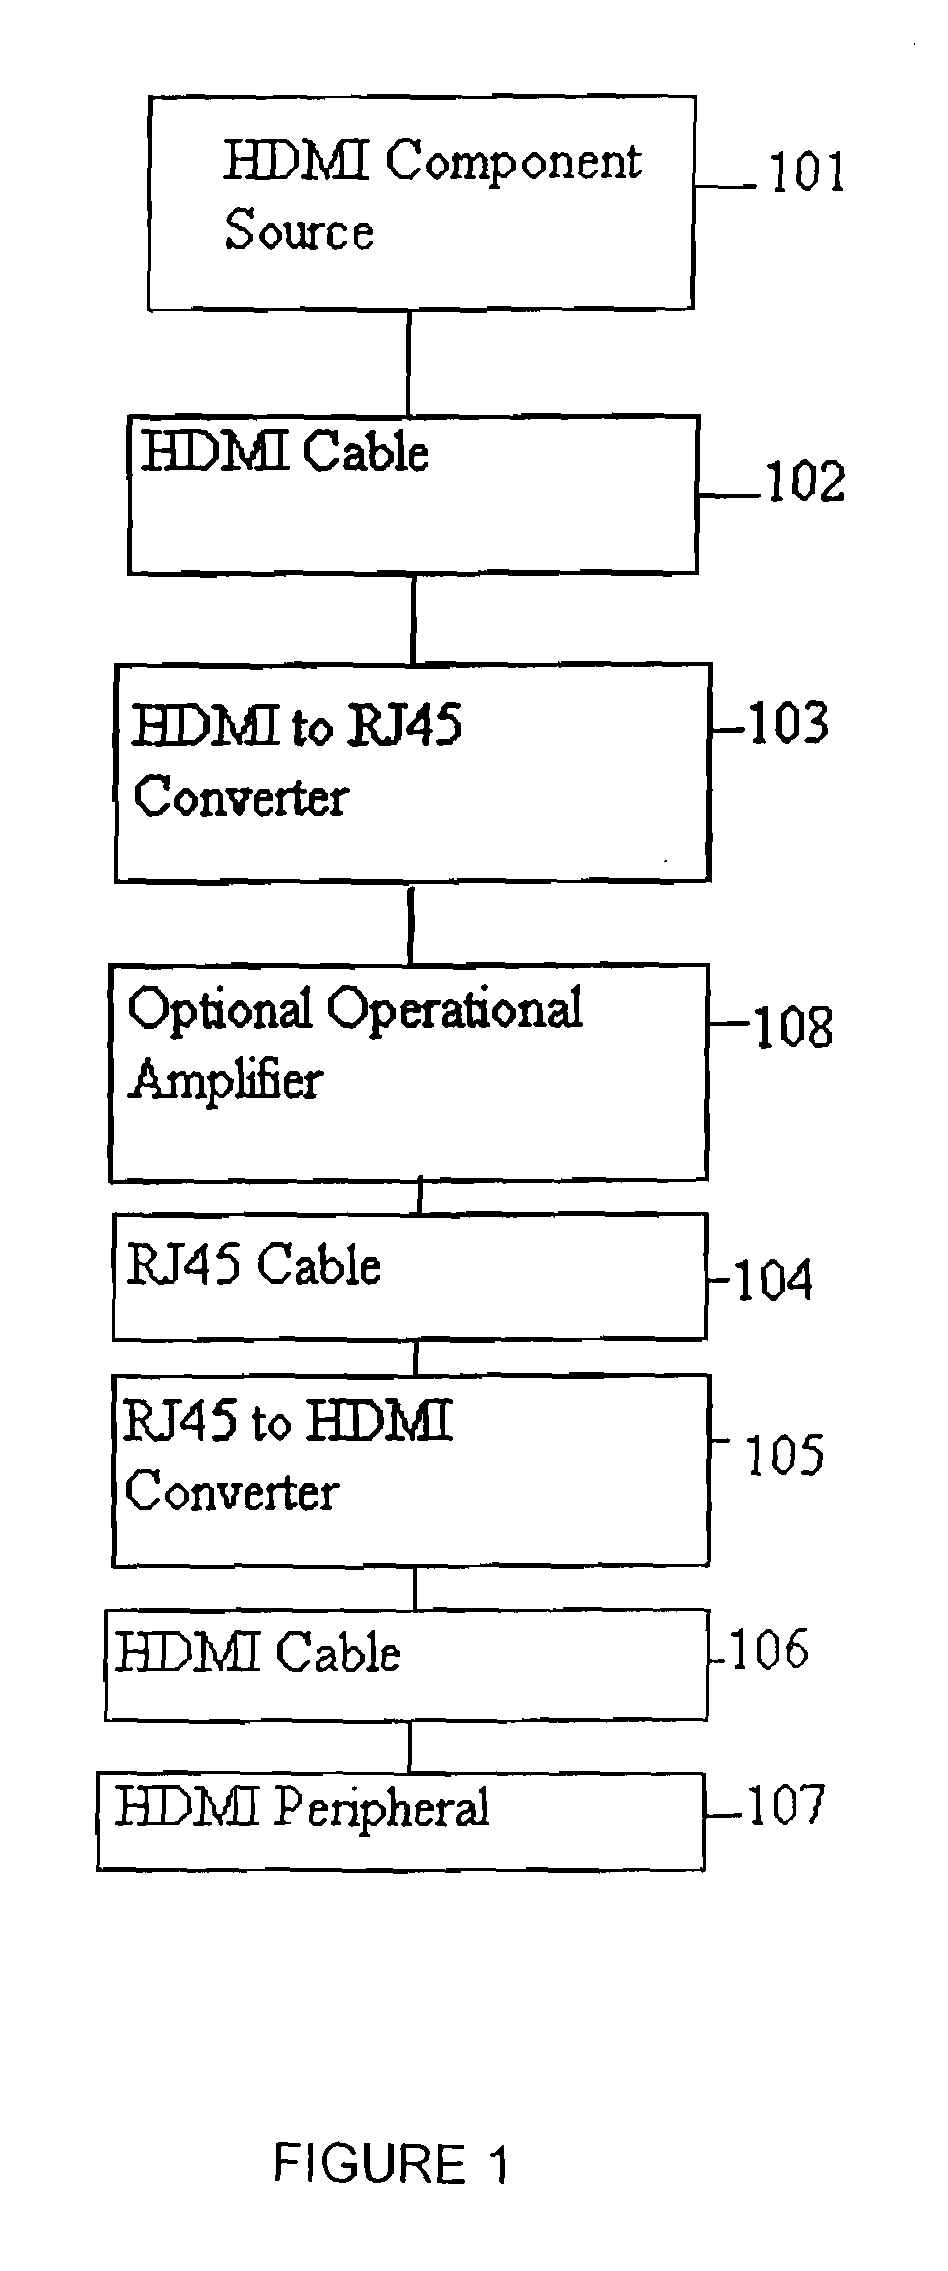 Cable Interface